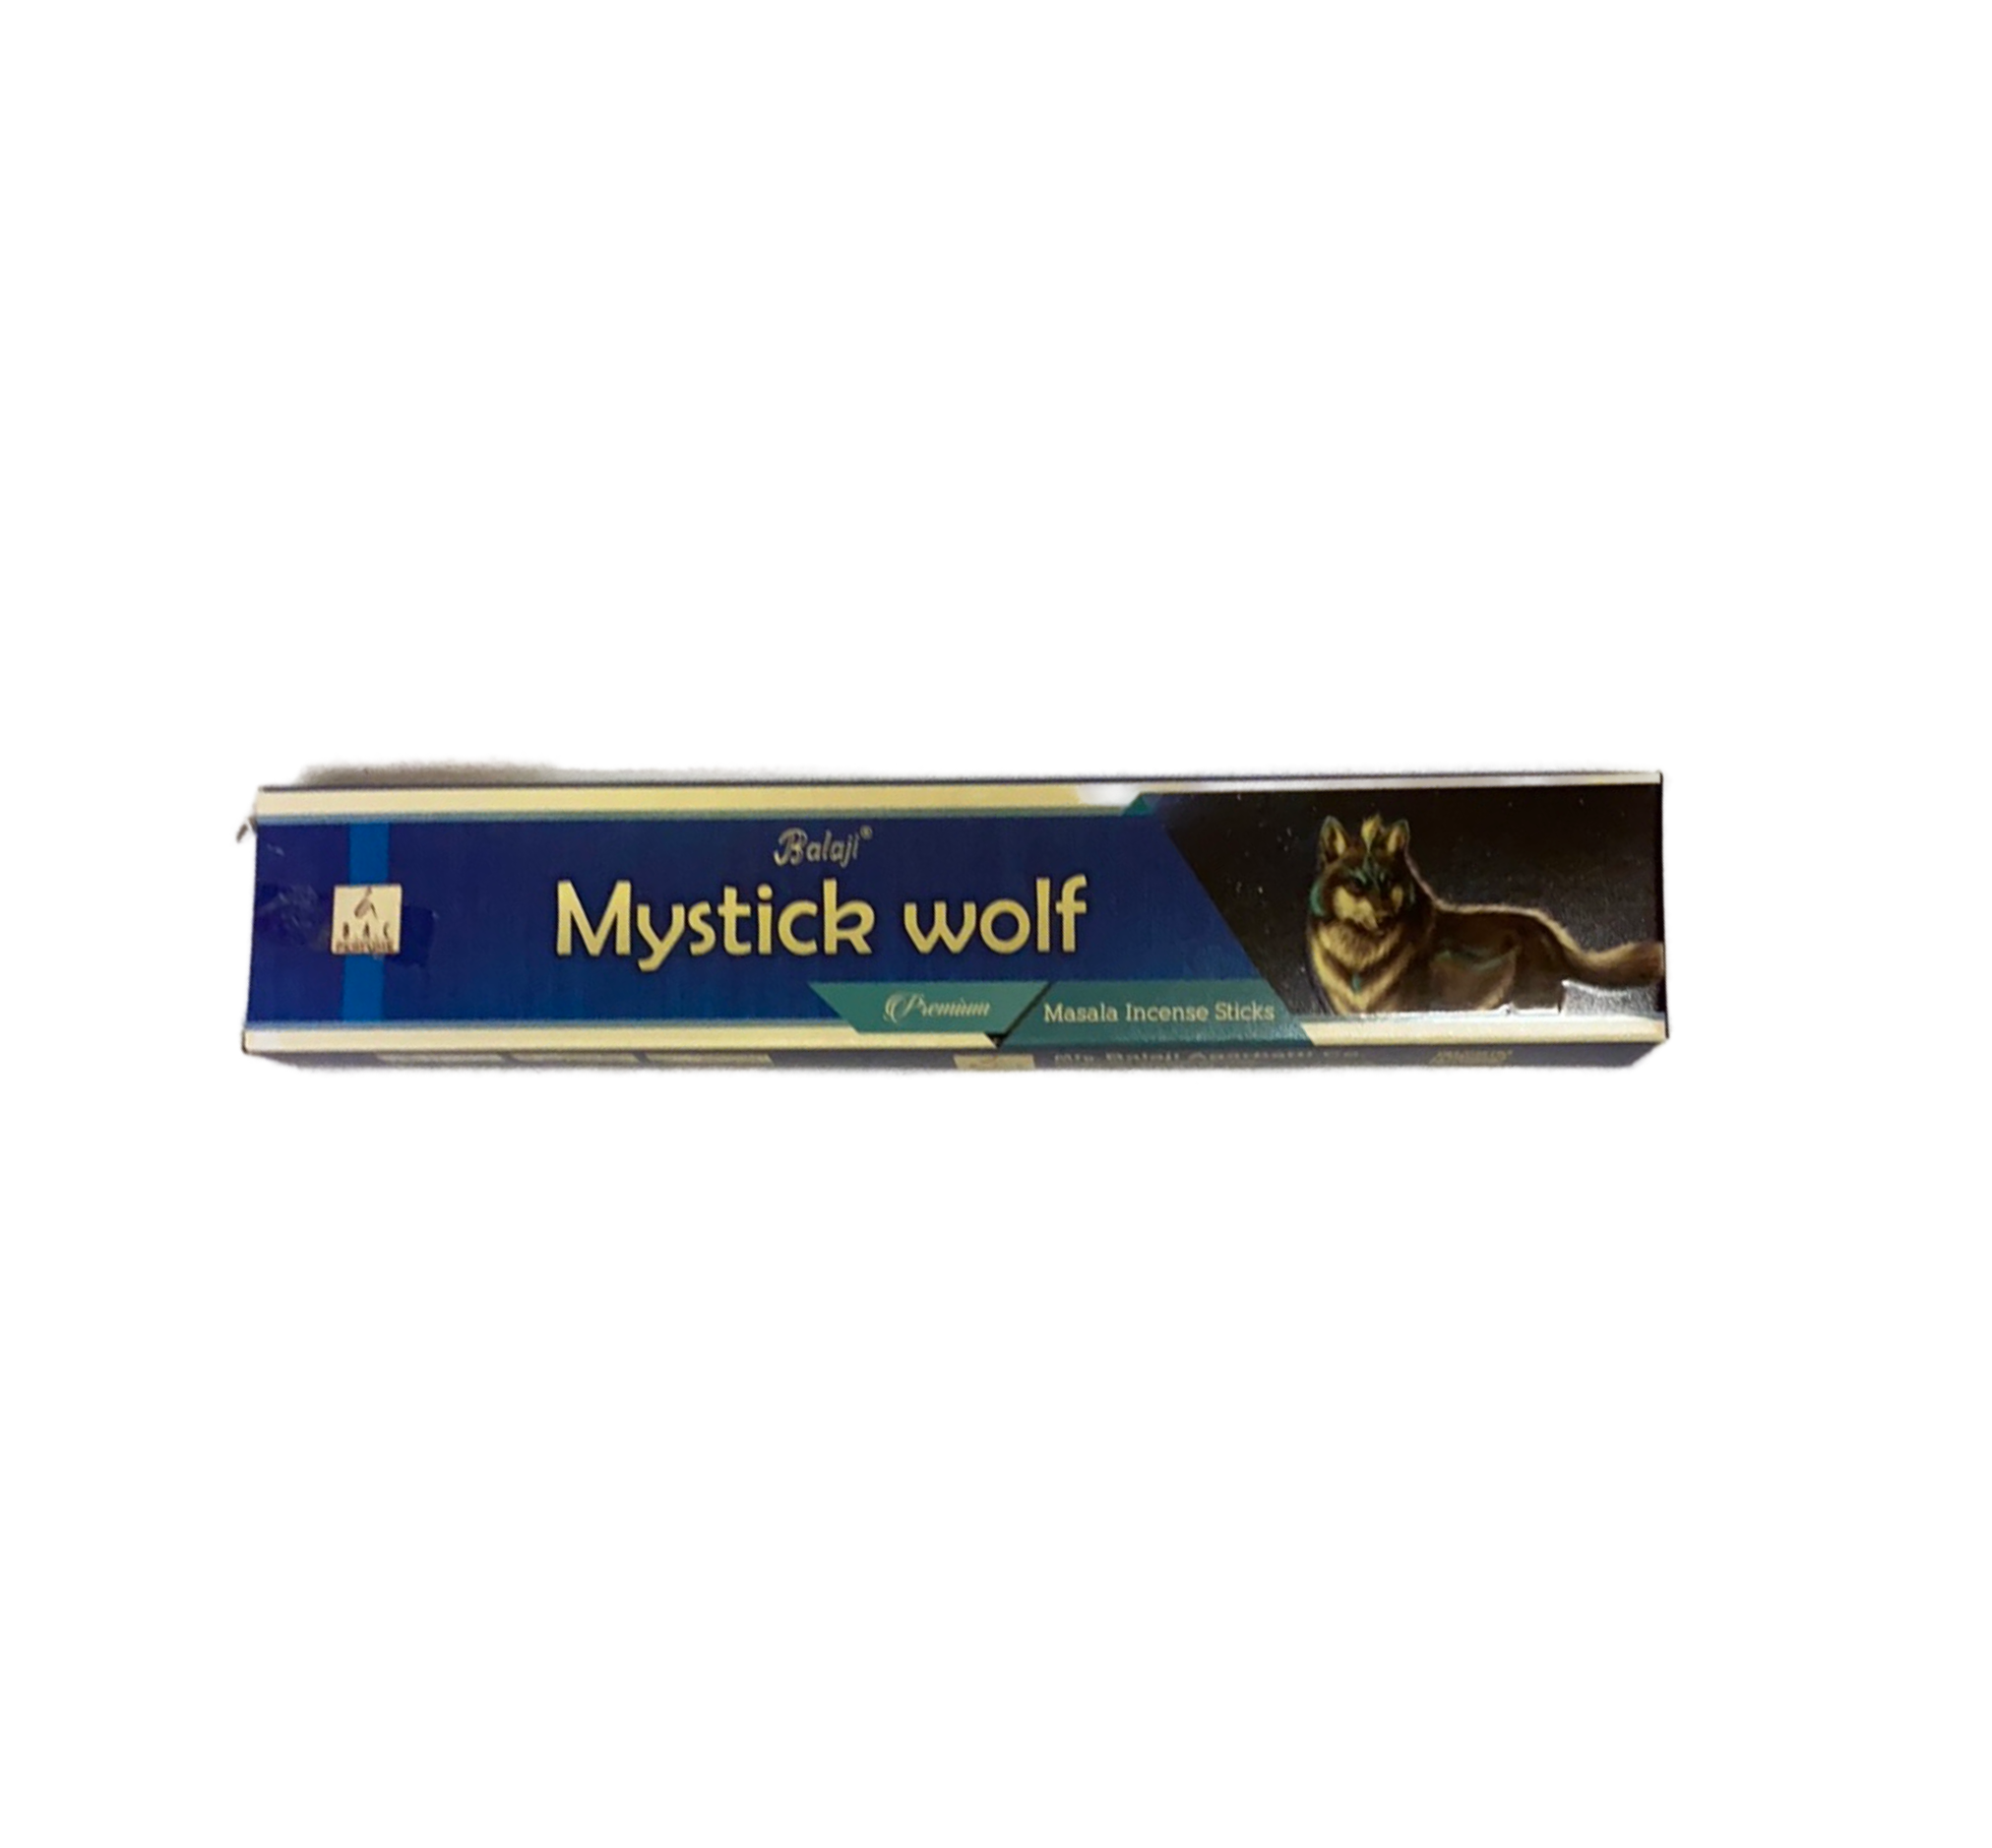 Blue box with image off a wolf and words Mystick wolf 